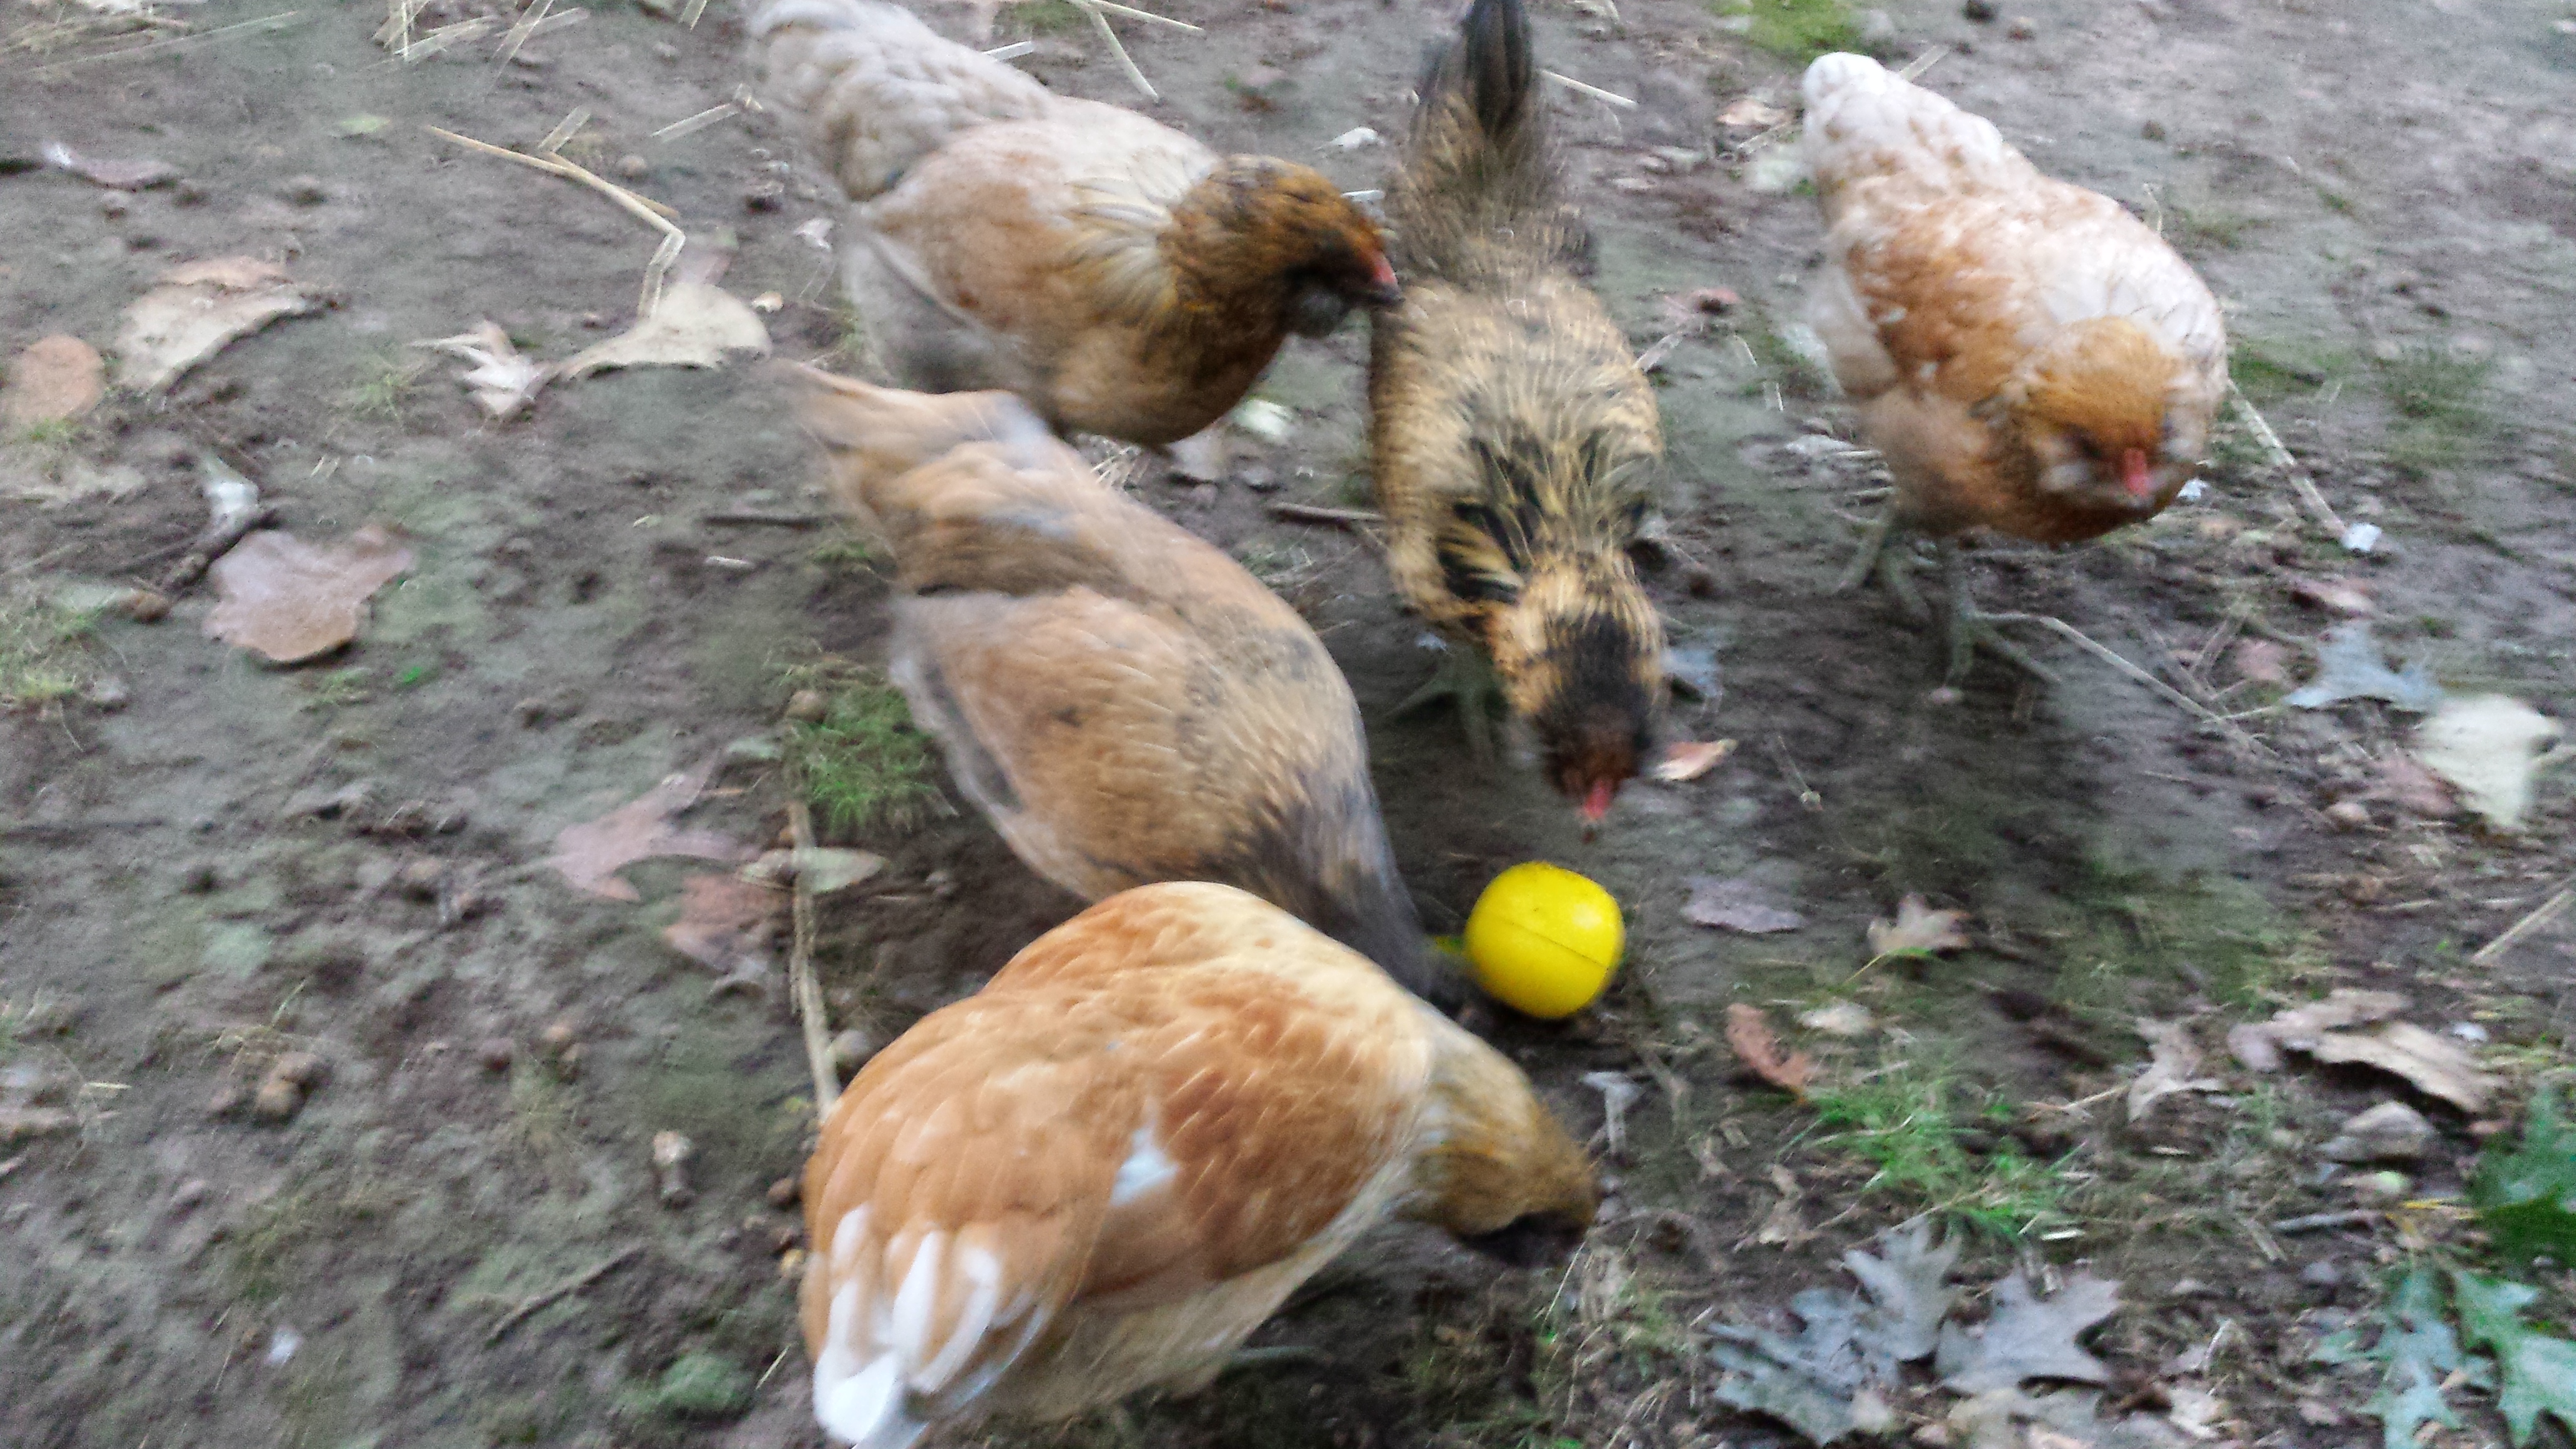 They all LOVE to play with the new chicken toy!
I fill it with goat feed